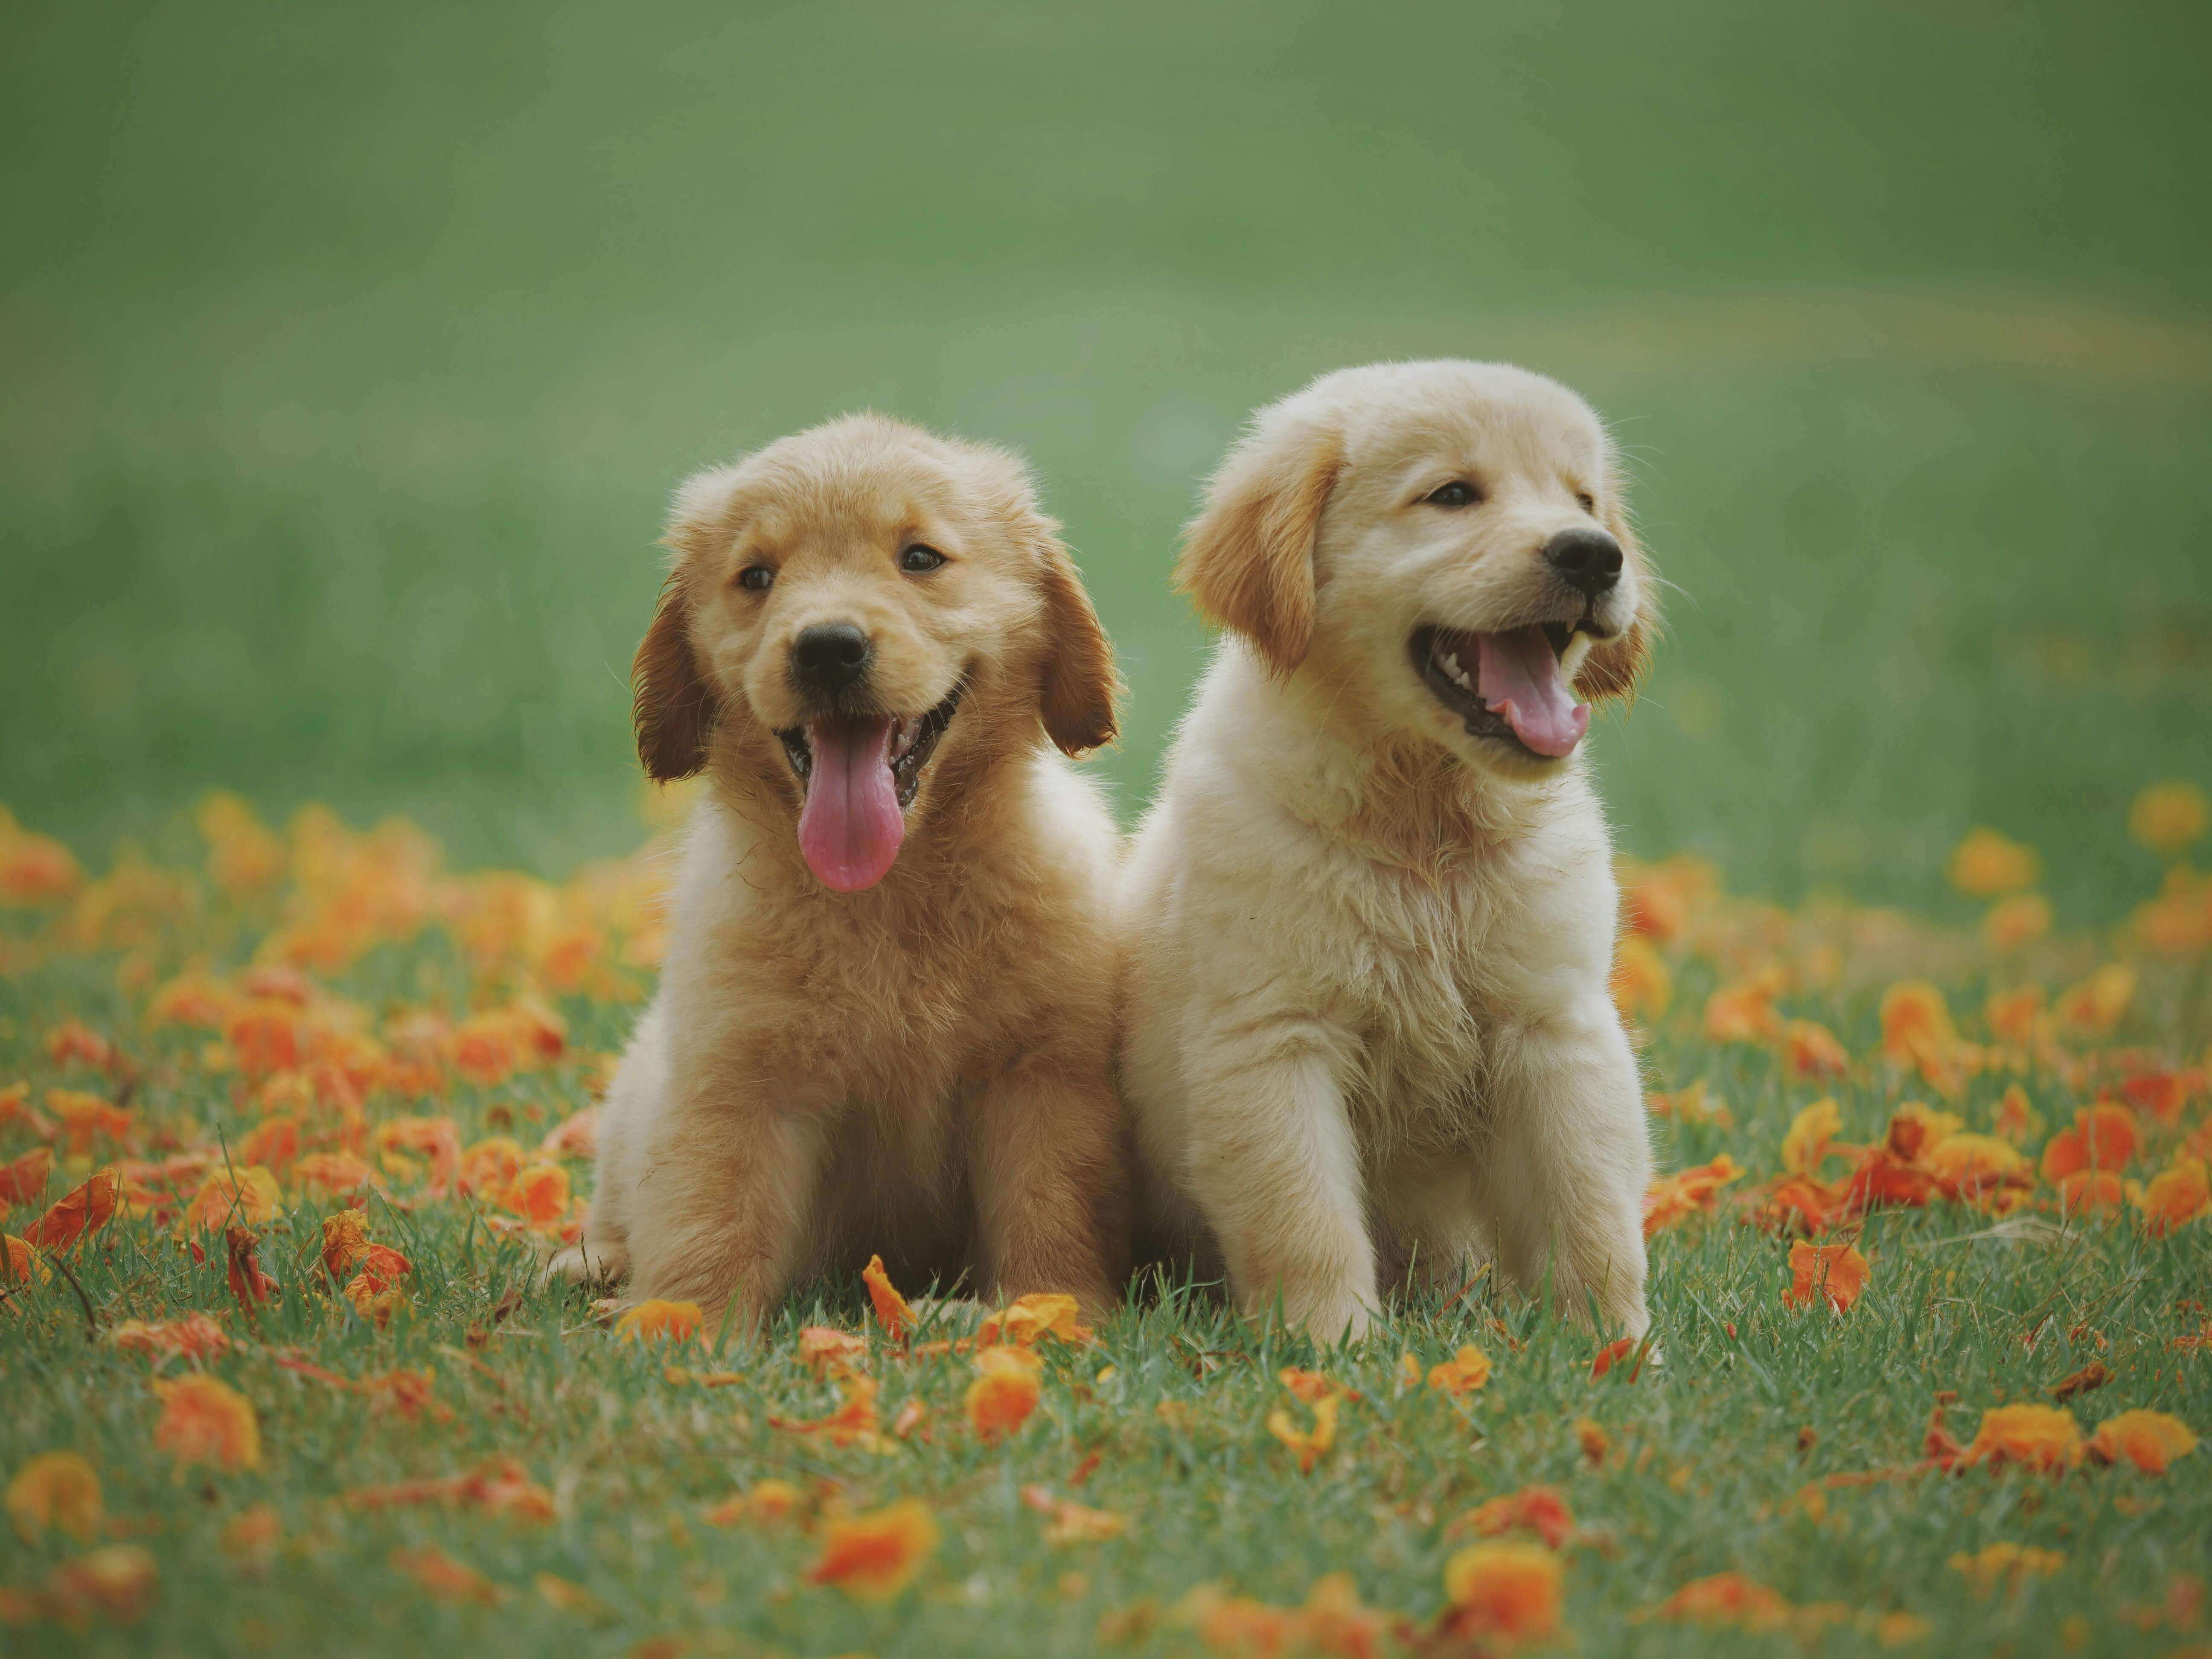 Image of cute puppies sitting together on a lush green lawn, enjoying the outdoors.